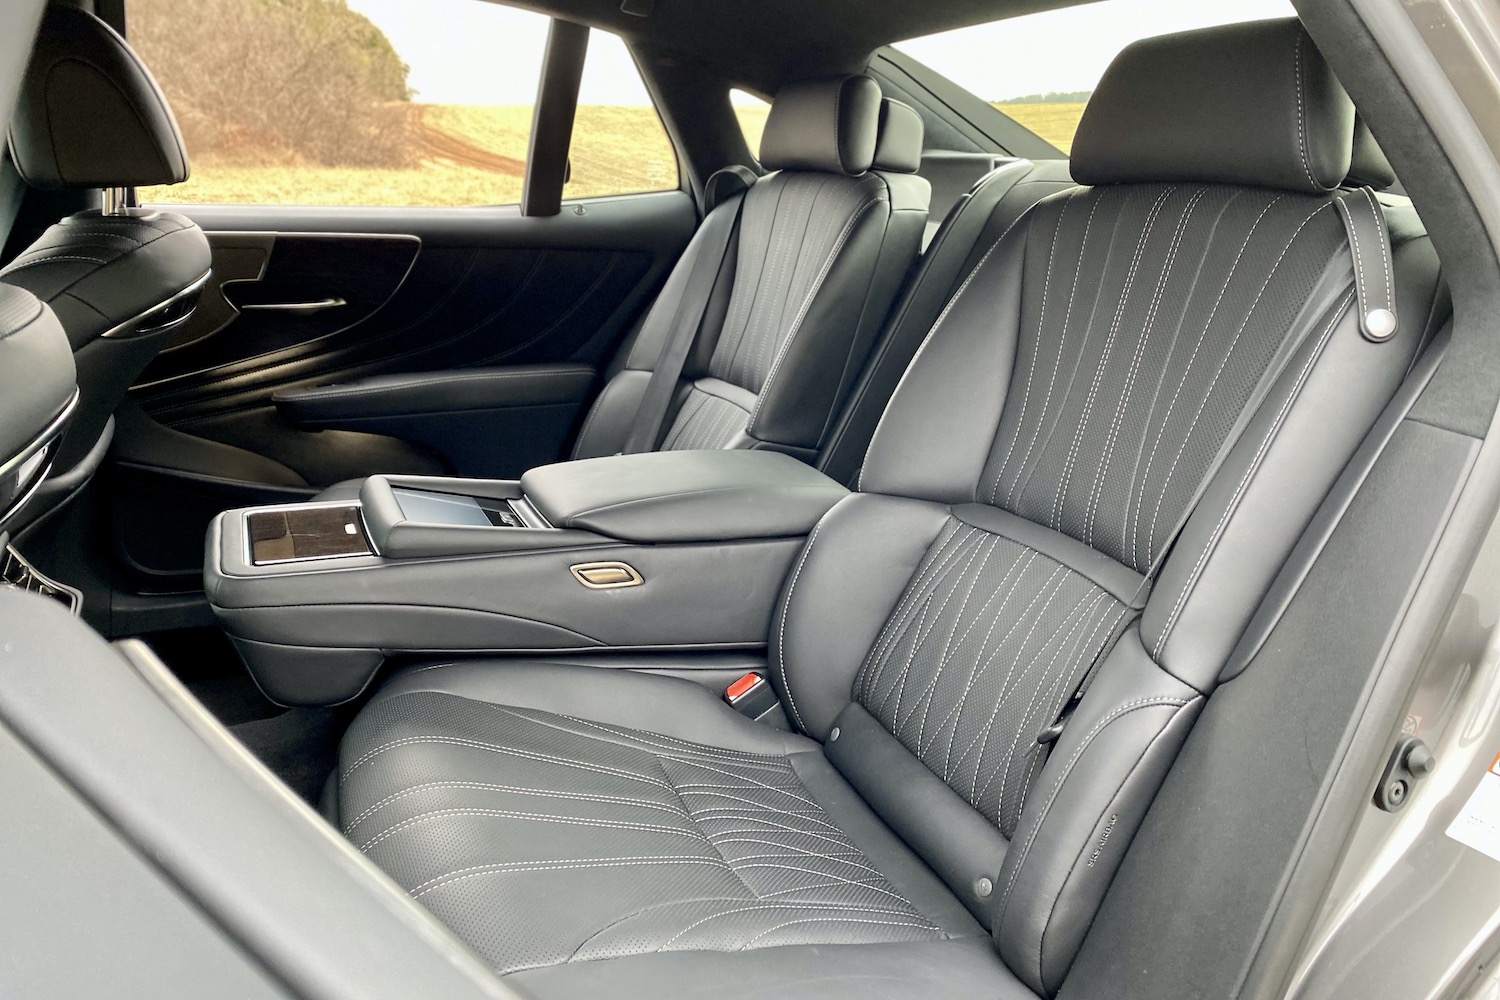 The rear seats in the 2021 Lexus LS500 from outside with trees in the back.